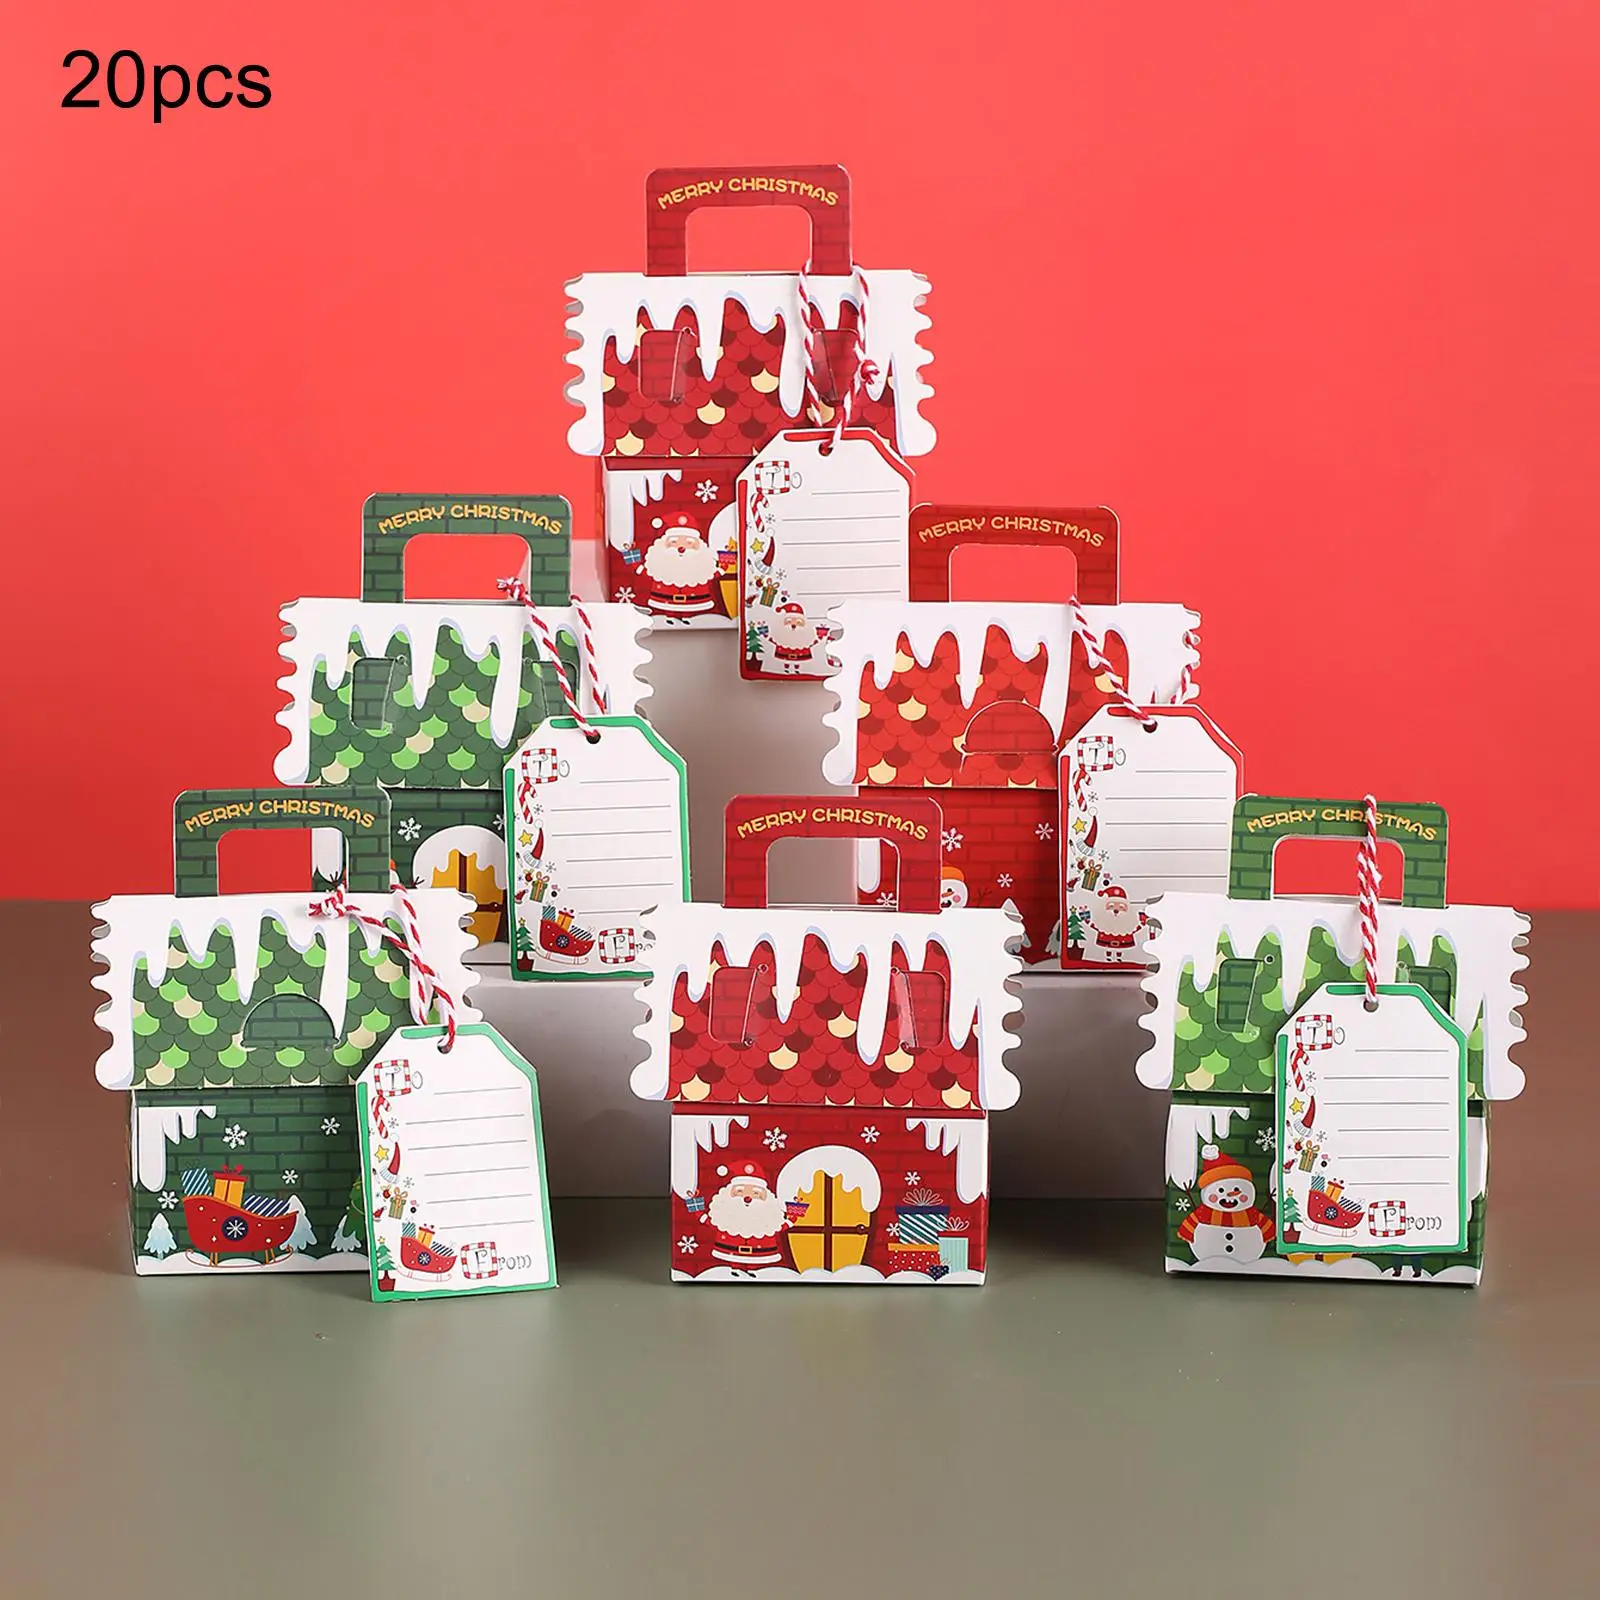 20x Christmas Goody Bags Candy Cookies Wrapping Bags for Party Christmas